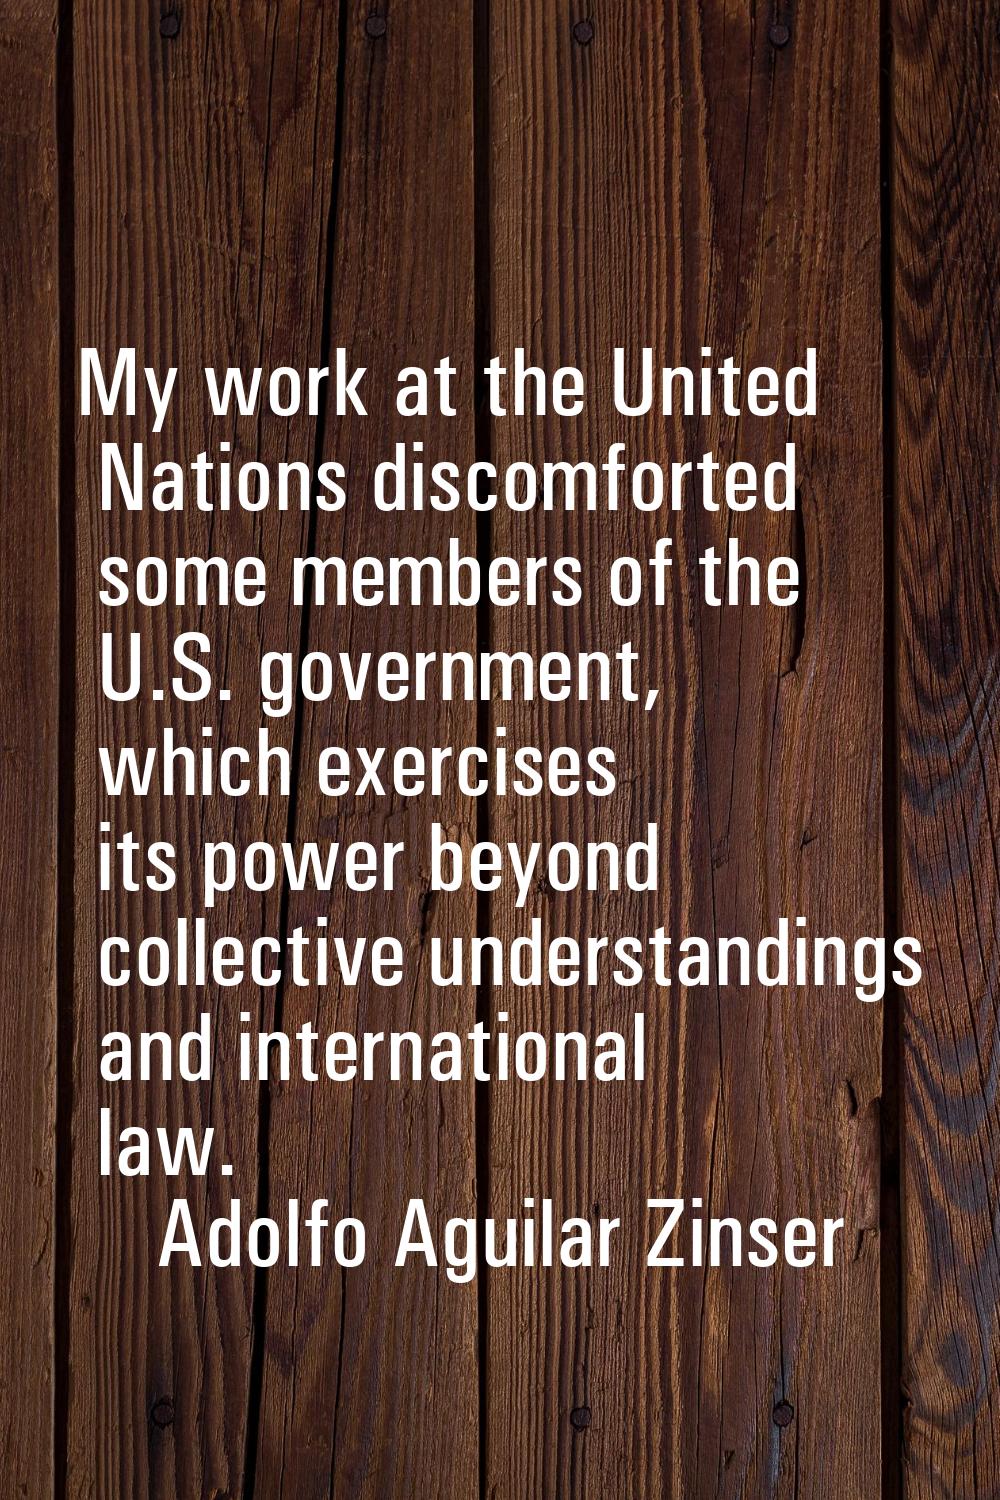 My work at the United Nations discomforted some members of the U.S. government, which exercises its